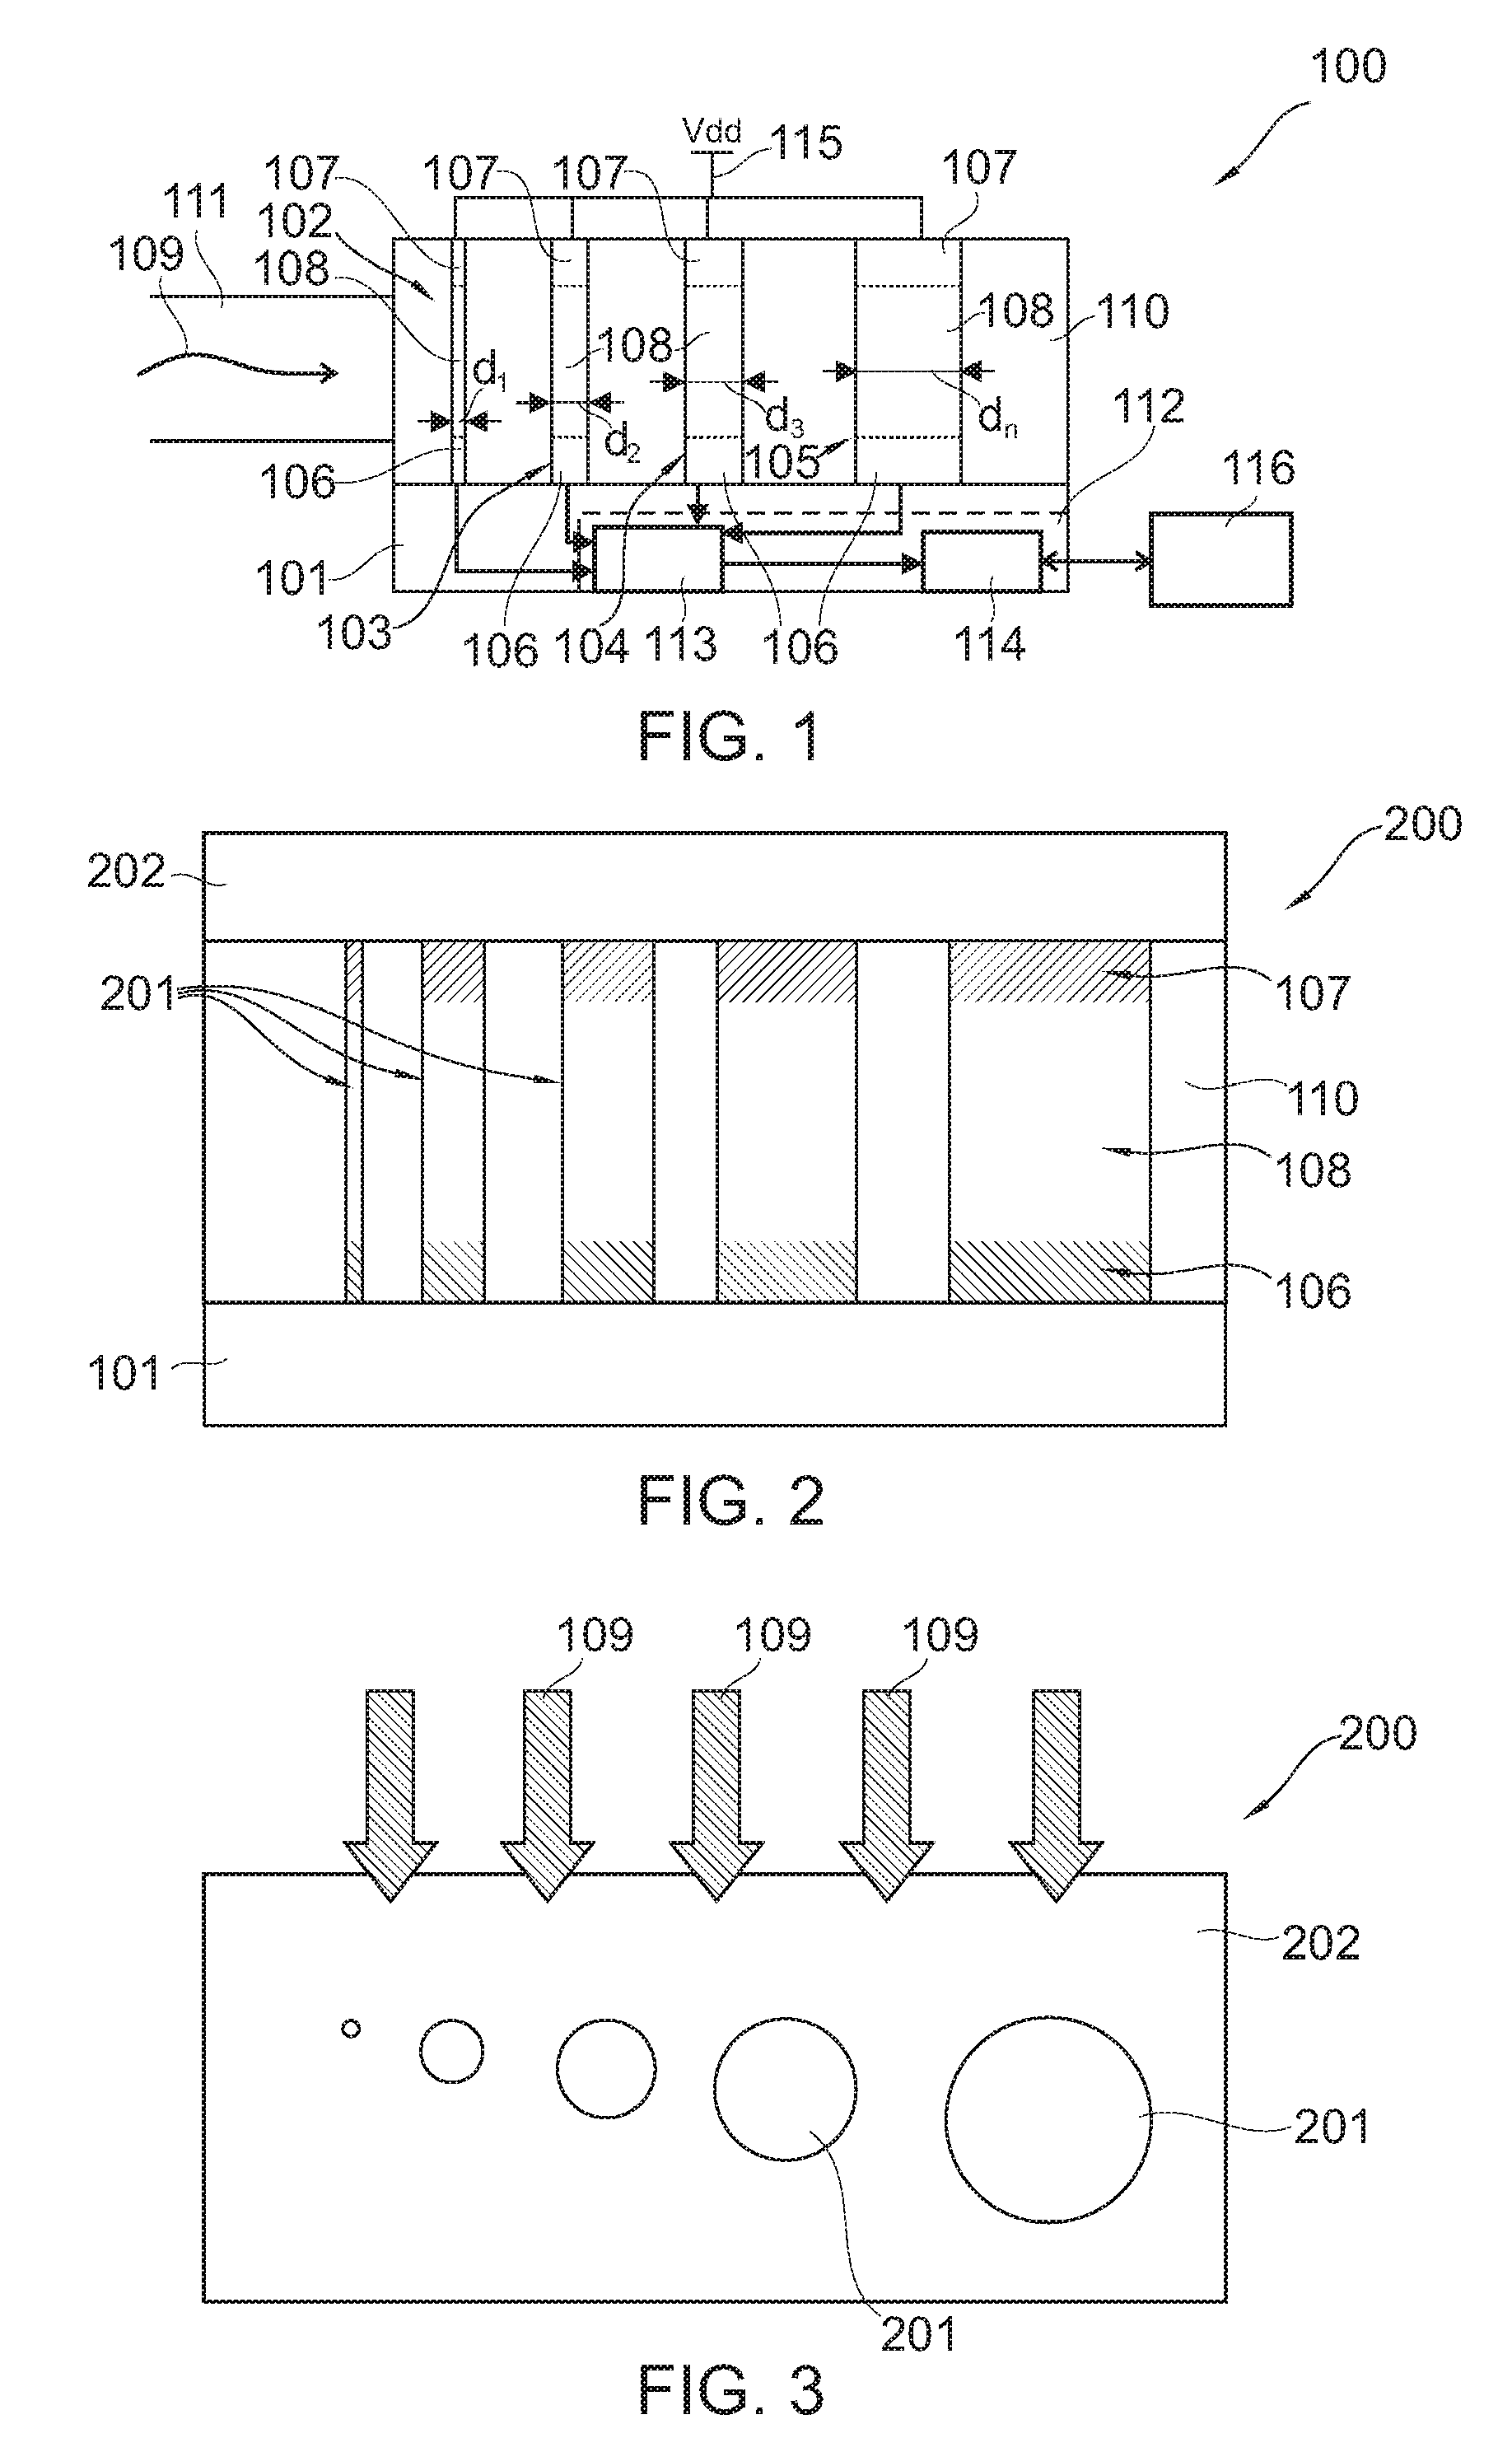 Photosensitive device and a method of manufacturing a photosensitive device